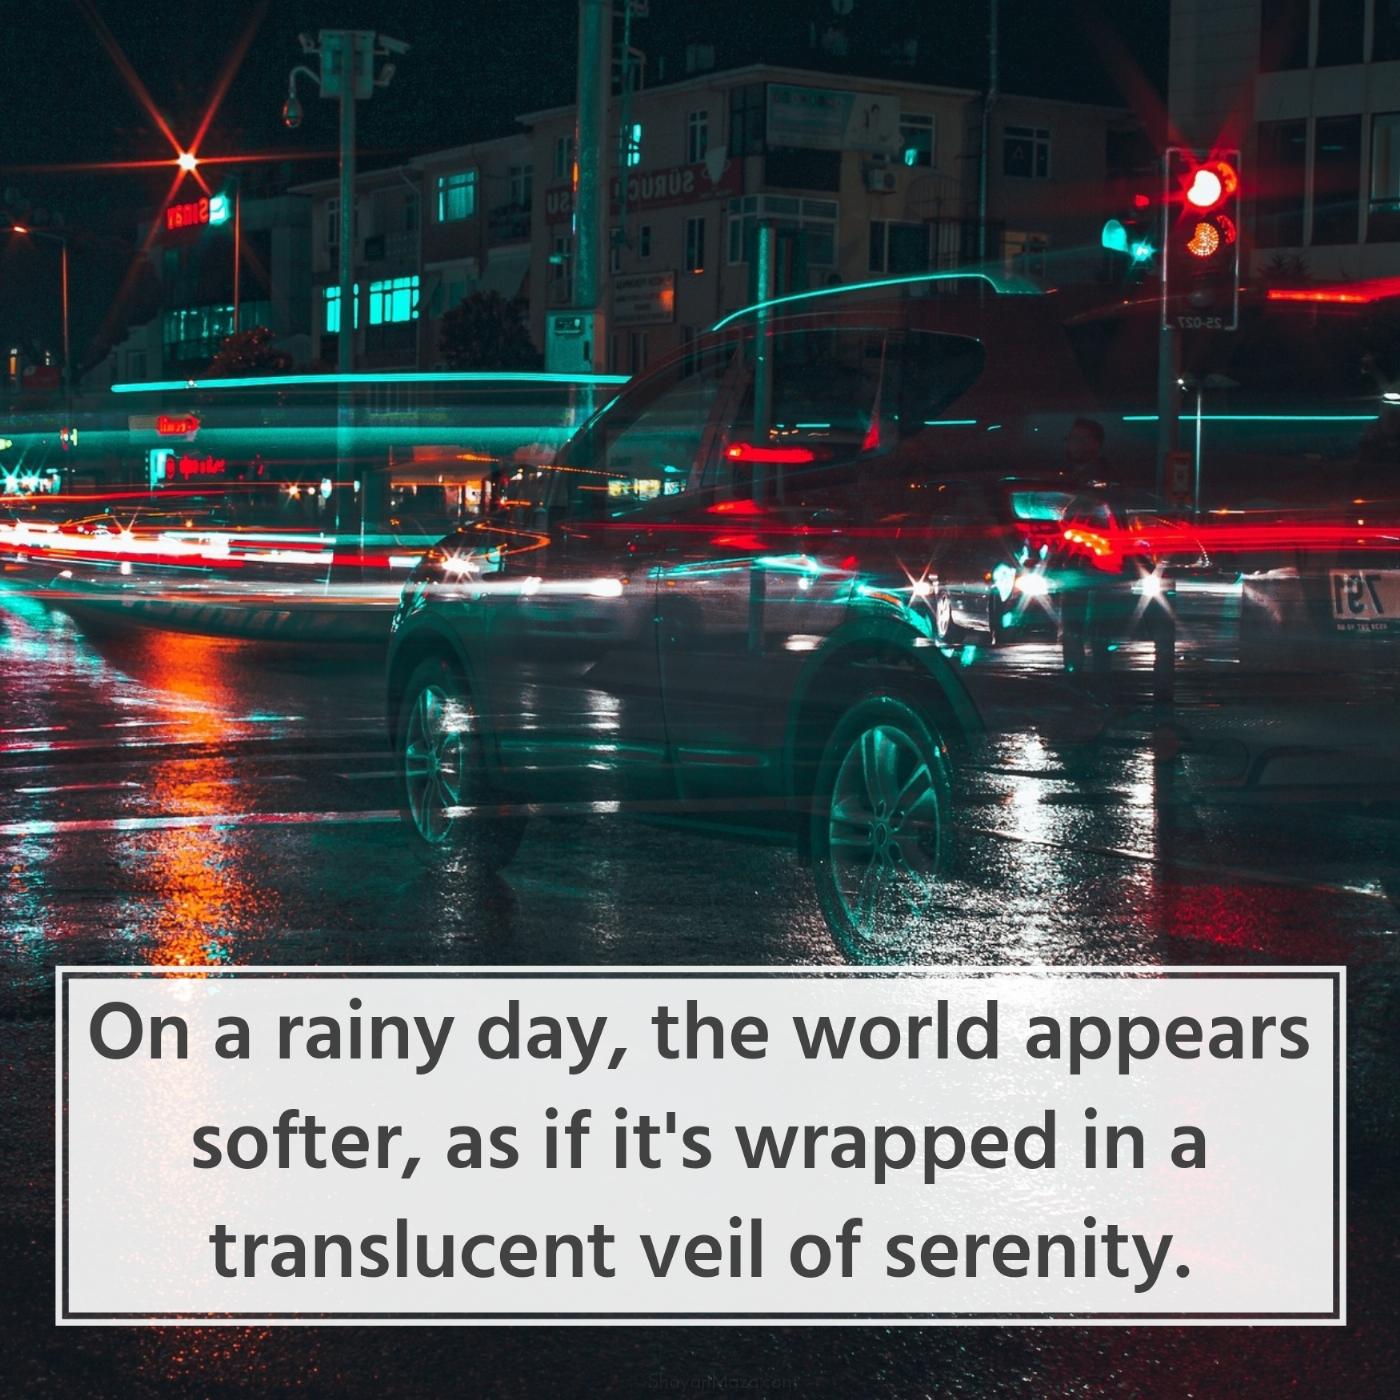 On a rainy day the world appears softer as if it's wrapped